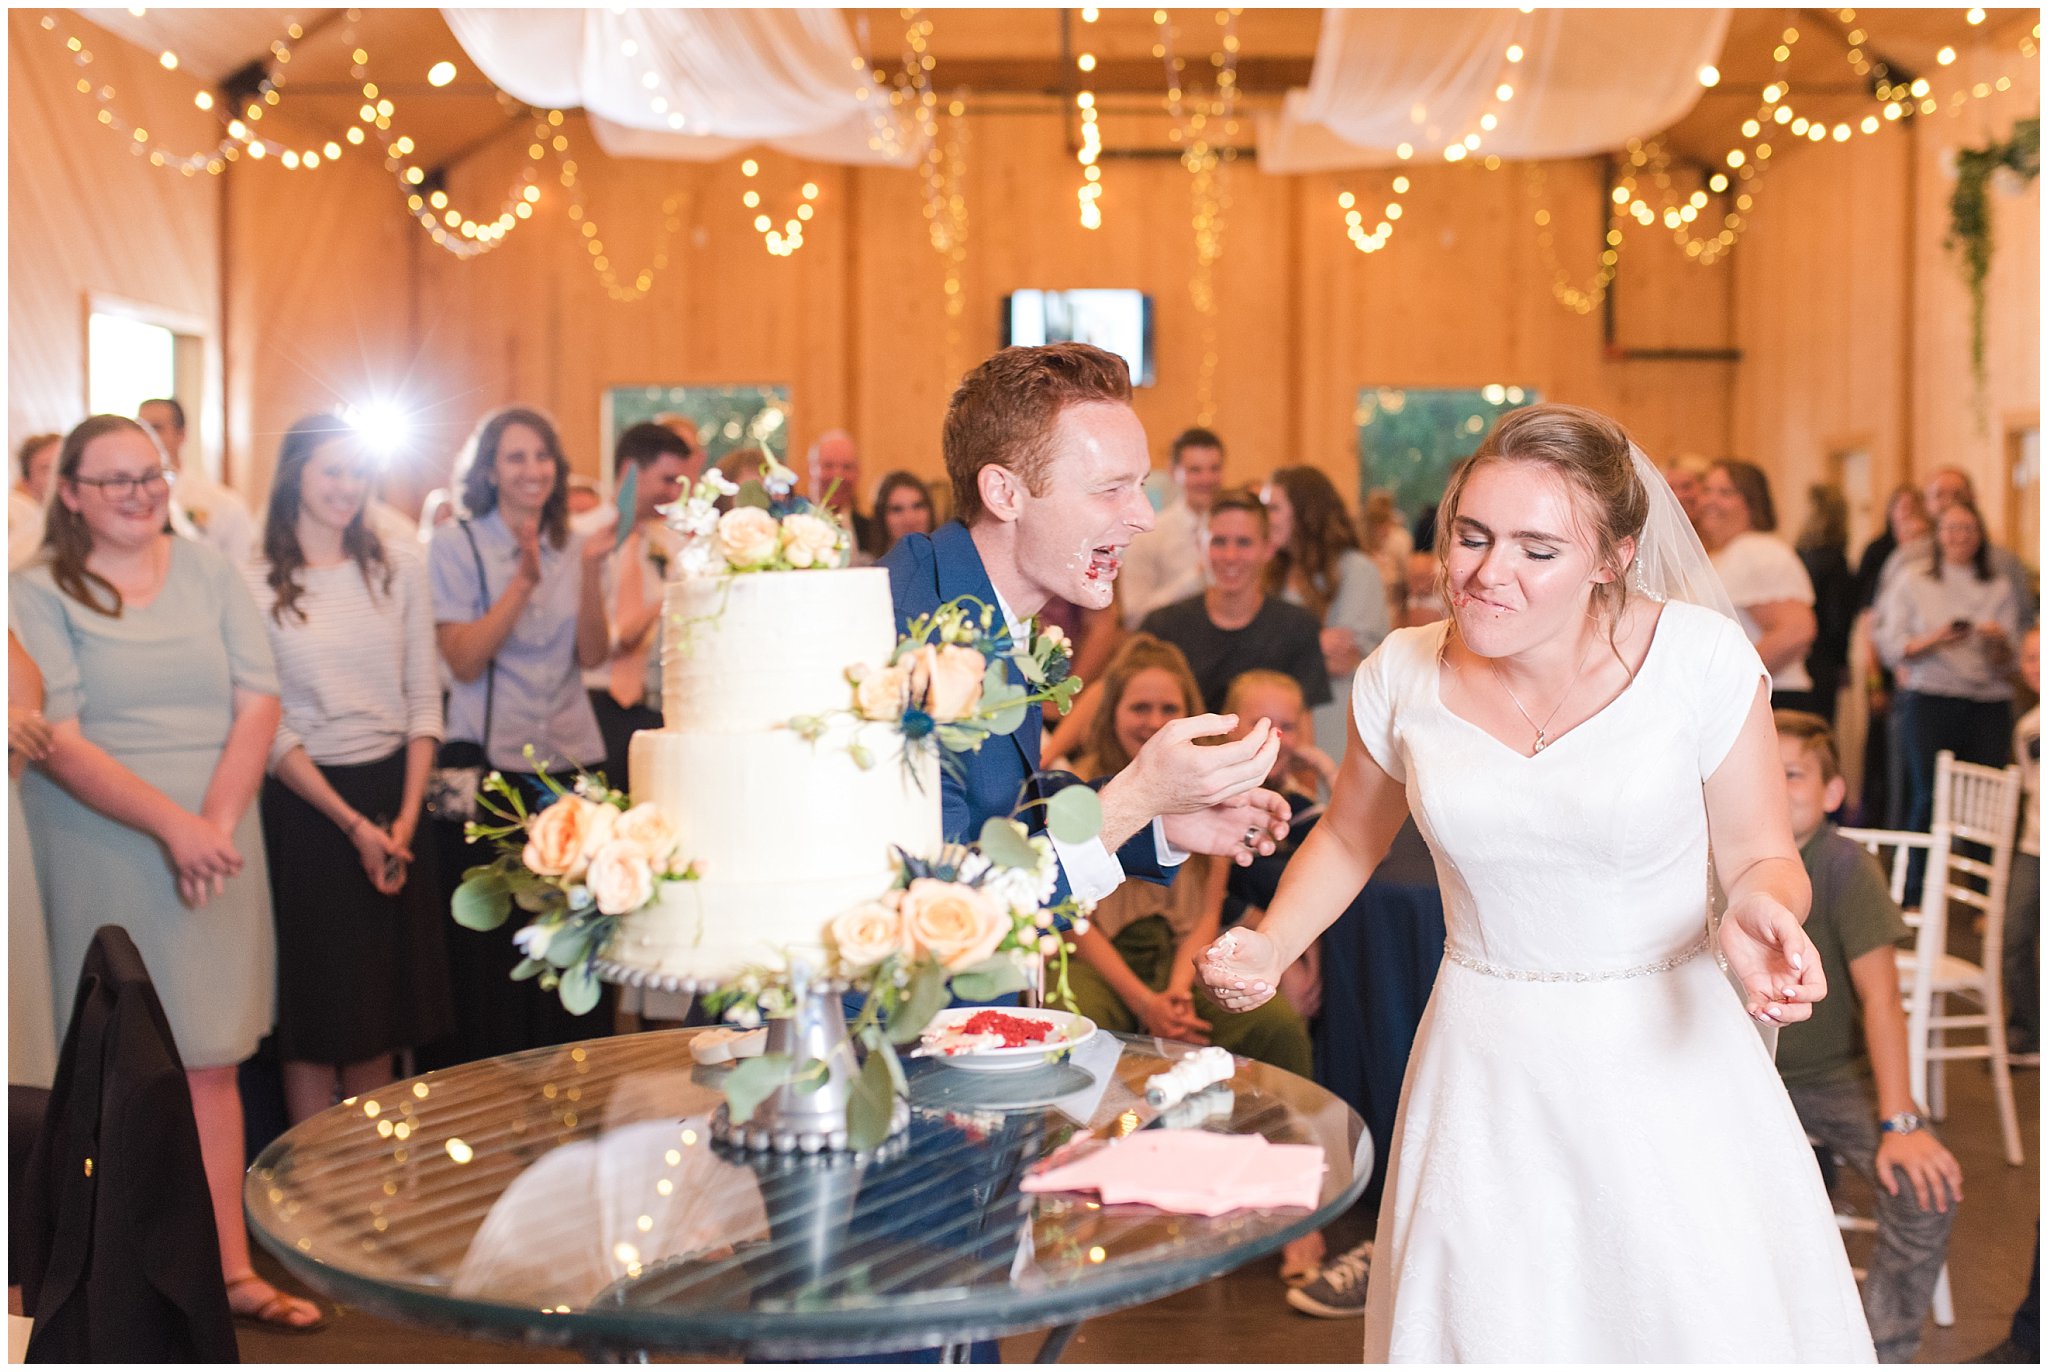 Bride and groom with a cake smash | white three tier cake with roses and blue thistles | Oak Hills Reception and Events Center | Jessie and Dallin Photography